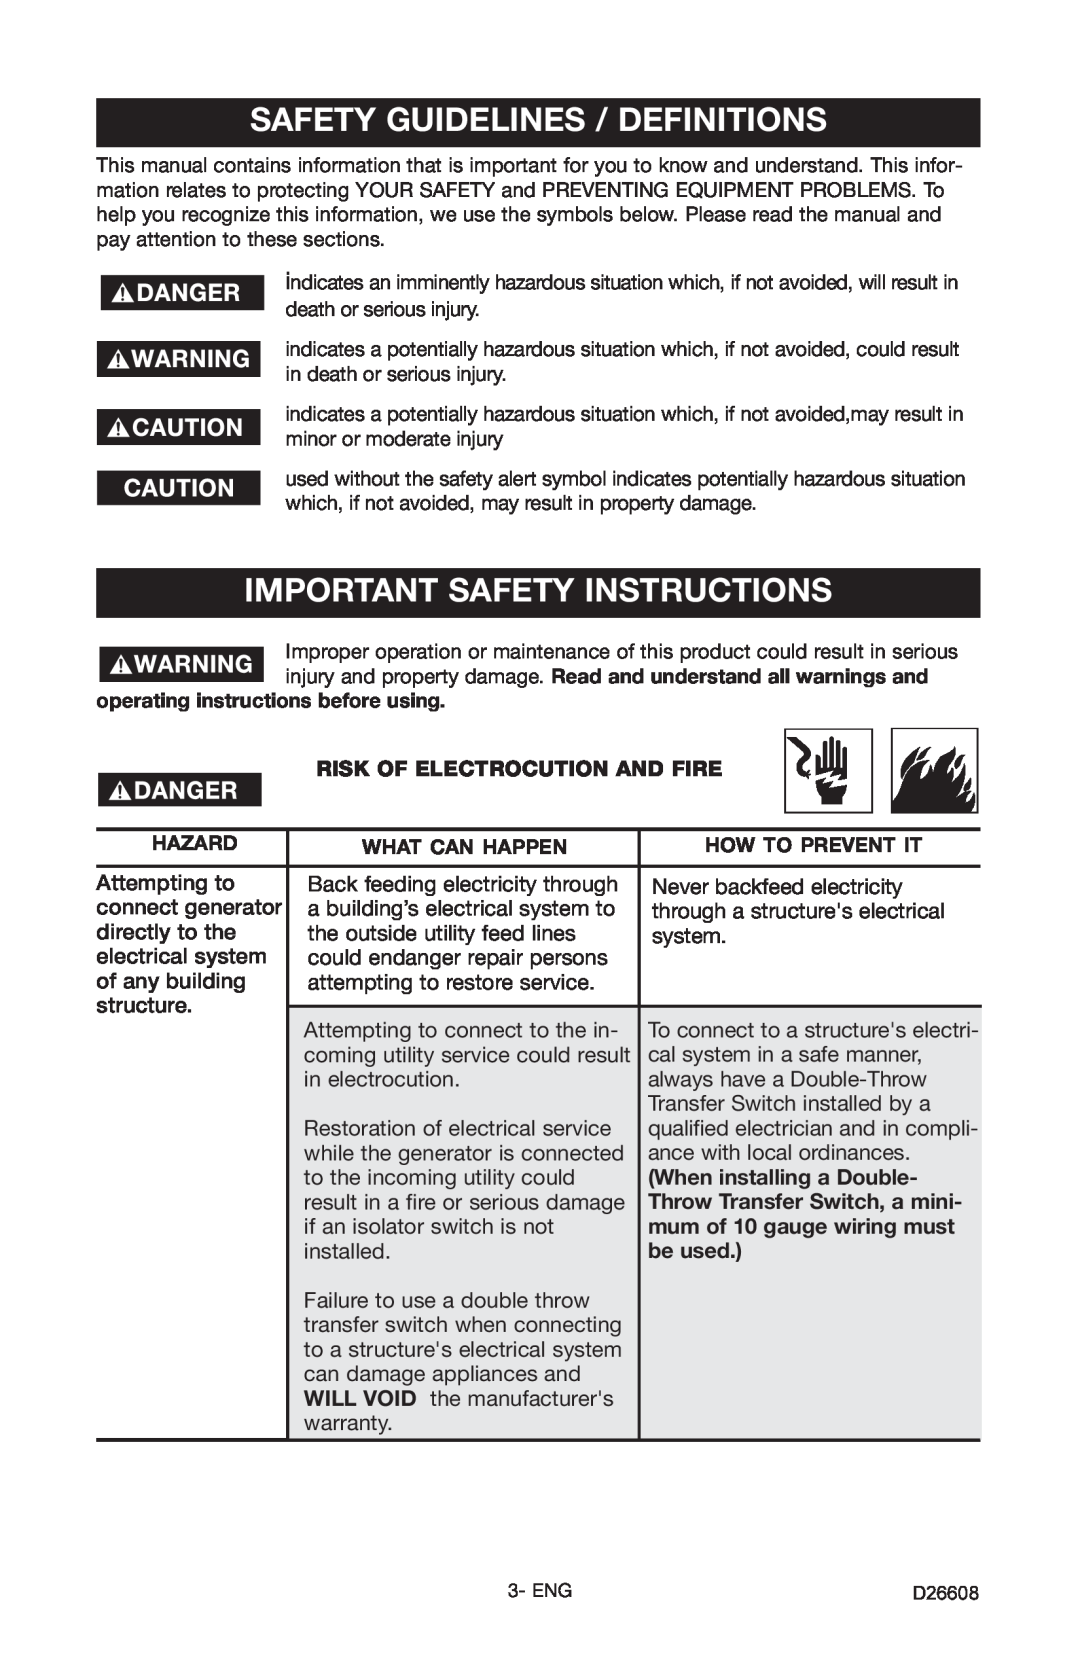 Porter-Cable DBSI325 Safety Guidelines / Definitions, Important Safety Instructions, Risk Of Electrocution And Fire 